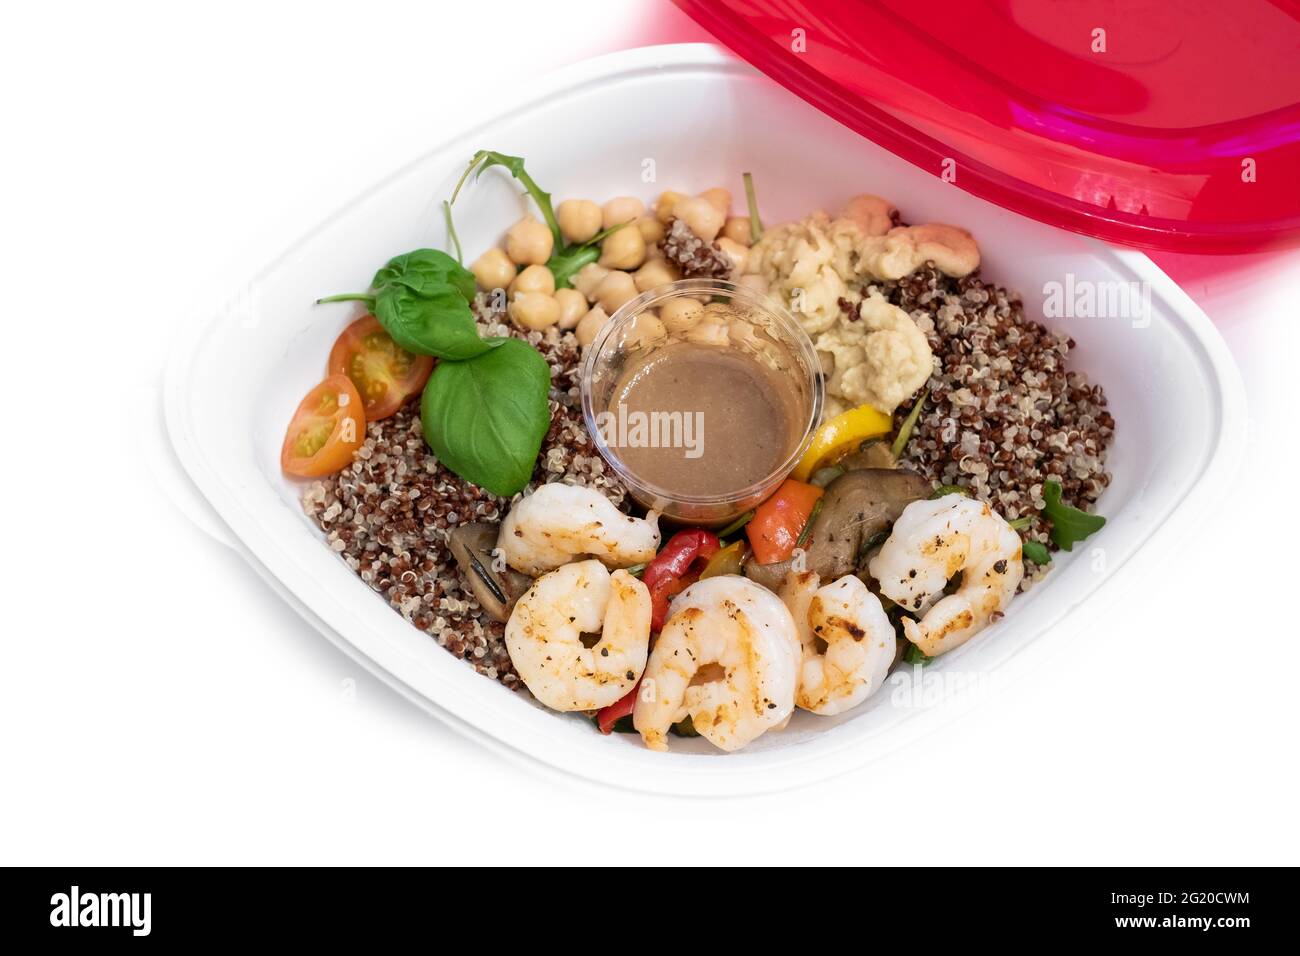 https://c8.alamy.com/comp/2G20CWM/salad-with-king-prawns-warm-grilled-vegetables-quinoa-chickpeas-tomatoes-and-hummus-take-out-food-balanced-lunch-2G20CWM.jpg